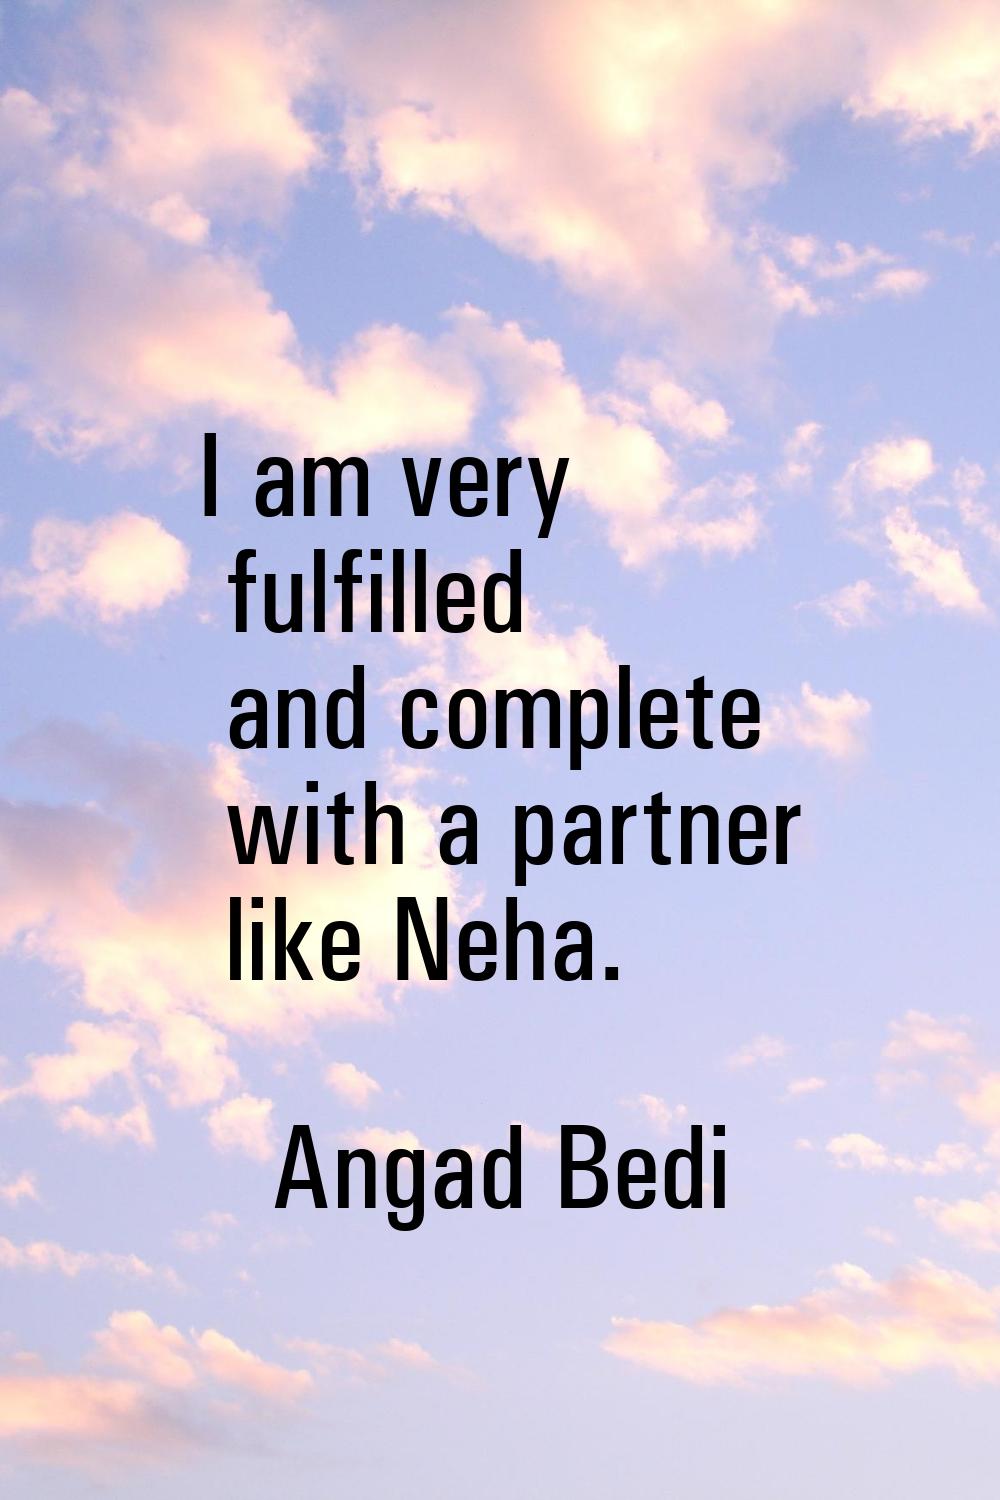 I am very fulfilled and complete with a partner like Neha.